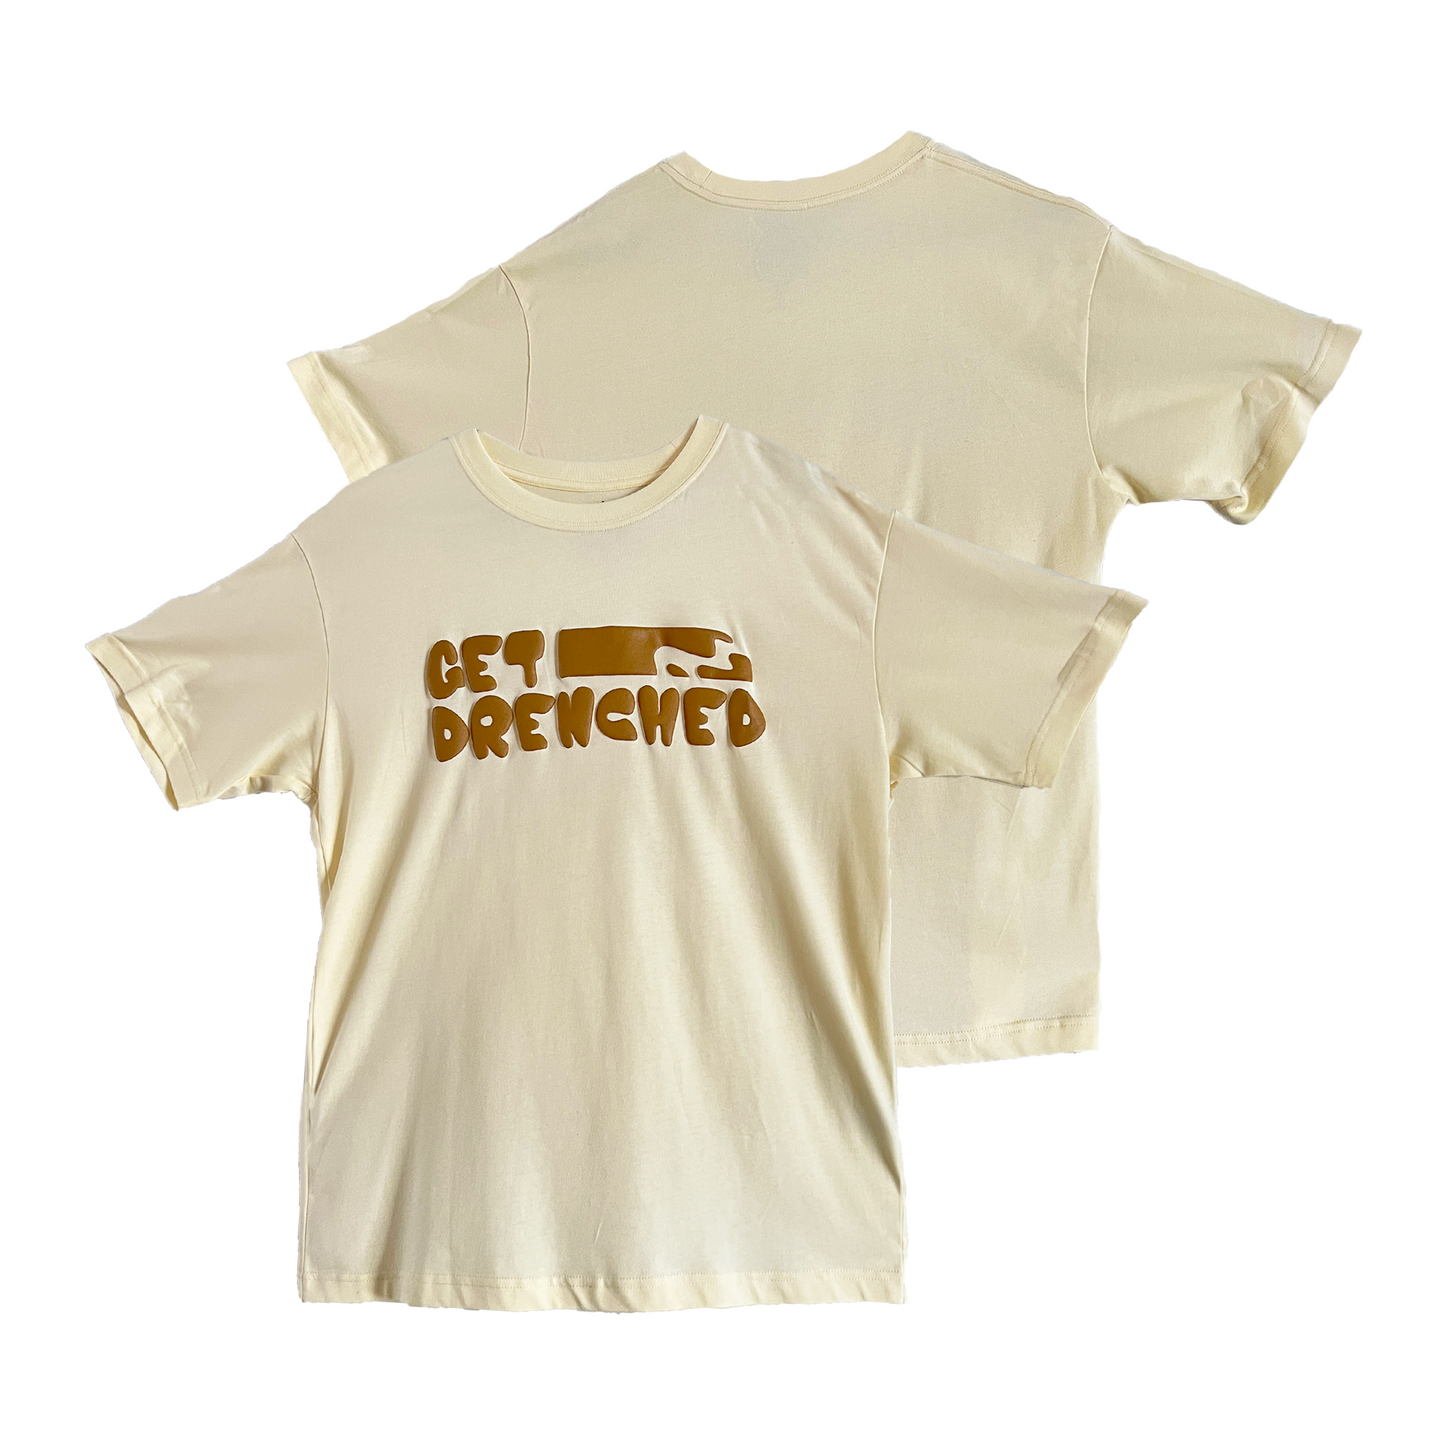 Get Drenched Tee